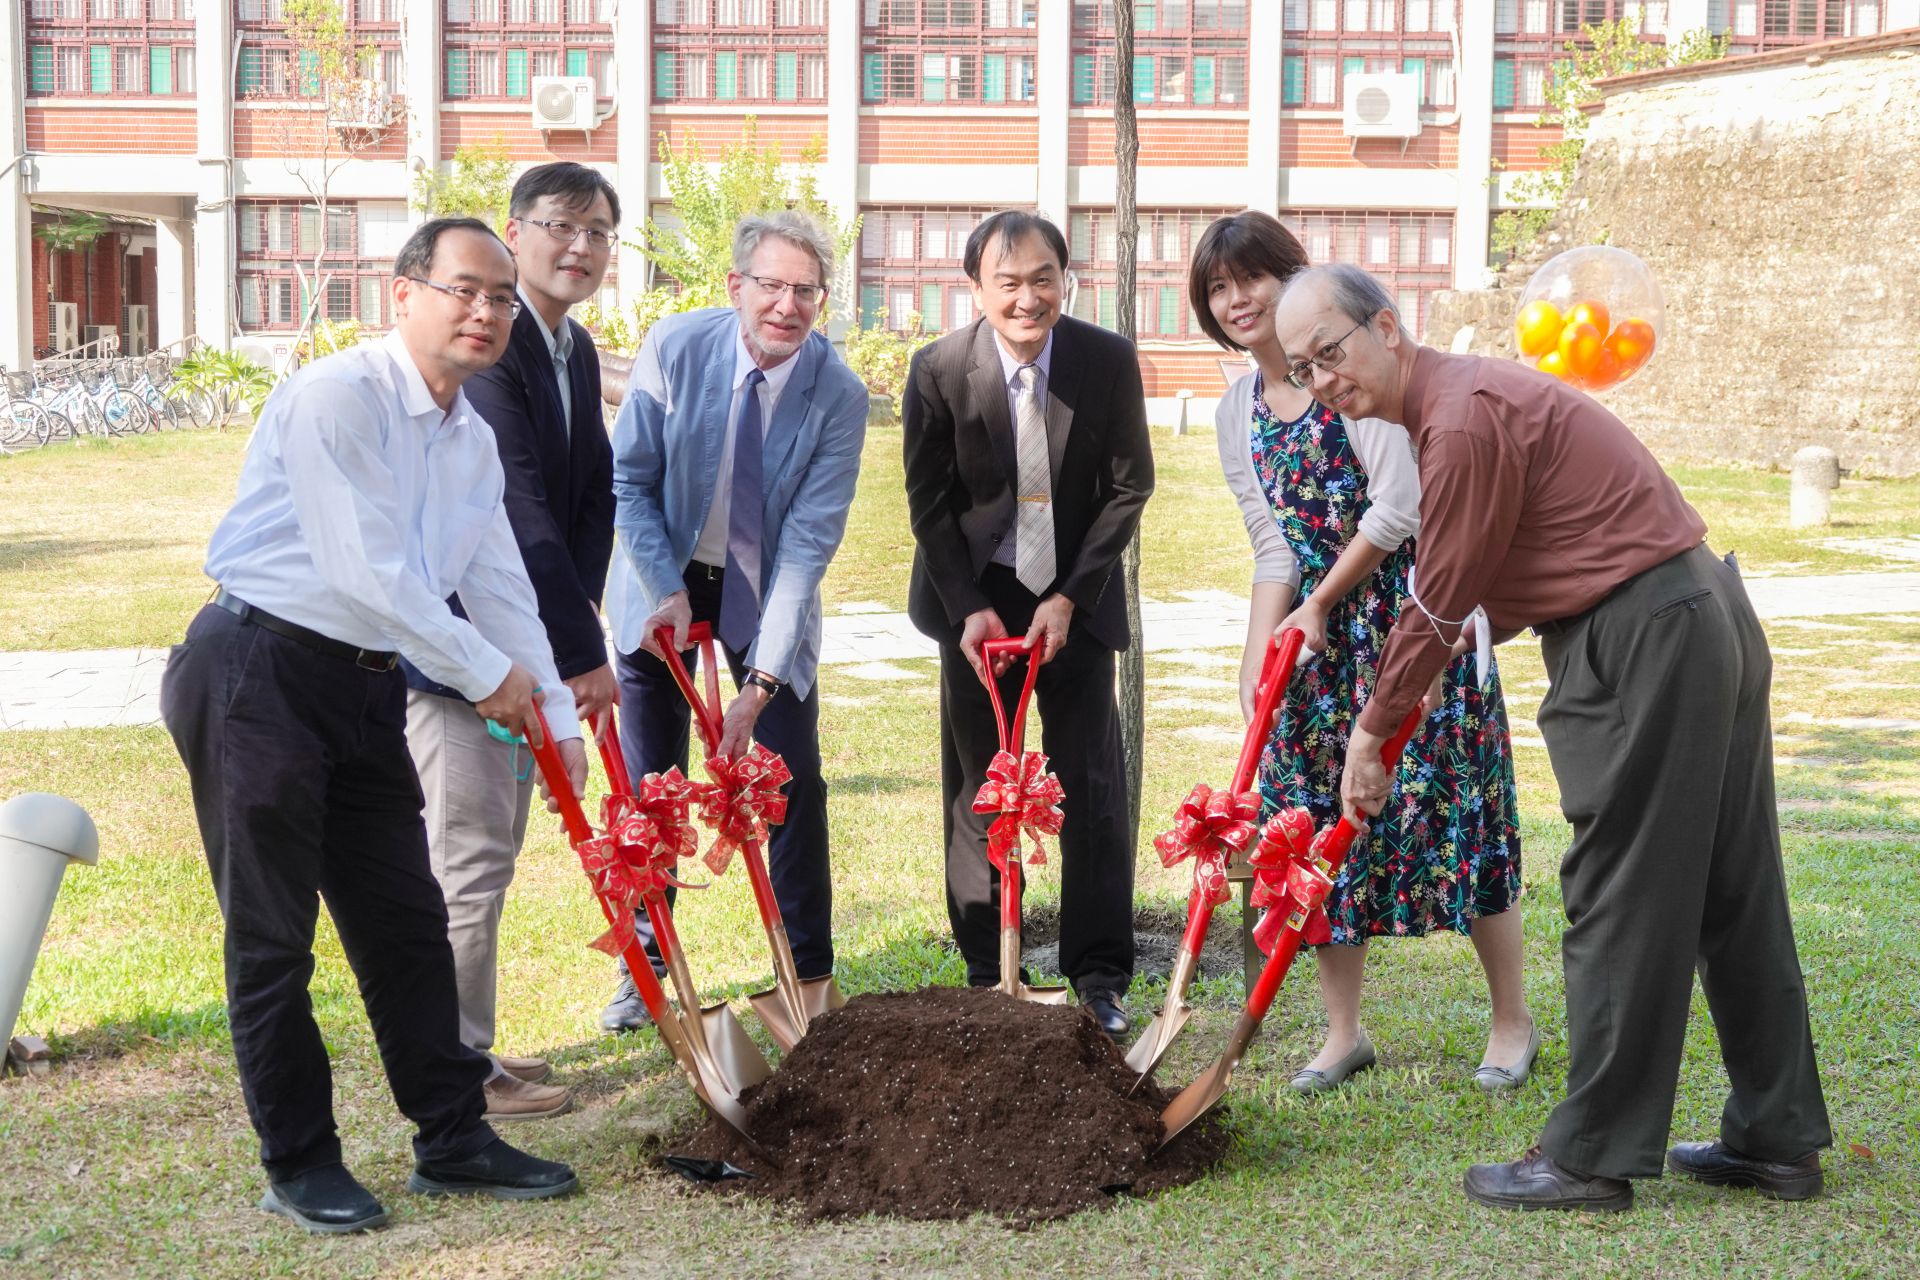 FSE And NCKU Hold a Tree-Planting Ceremony to Celebrate Friendship and Deepen Talent Exchange Between The US and Taiwan